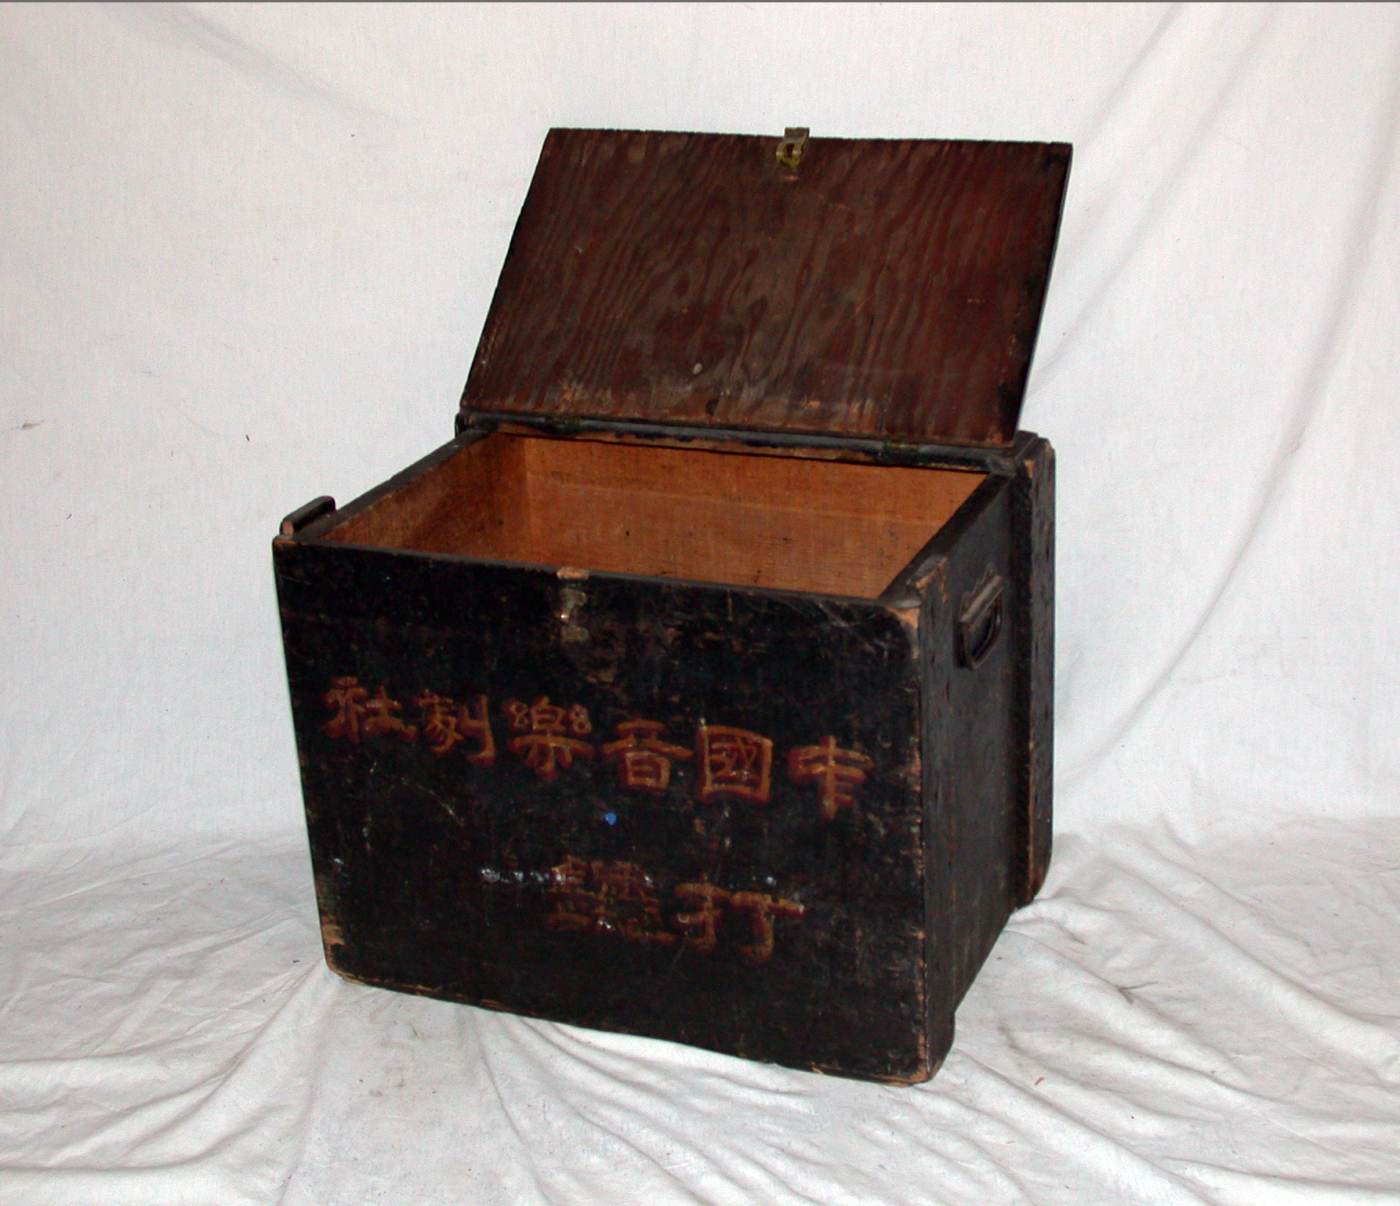 1989.002.381 Wooden trunk used by a Cantonese opera troupe to store makeup and hair accessories. Photograph taken pre-fire. Museum of Chinese in America (MOCA) Chinese Musical and Theatrical Association (CMTA) Collection.